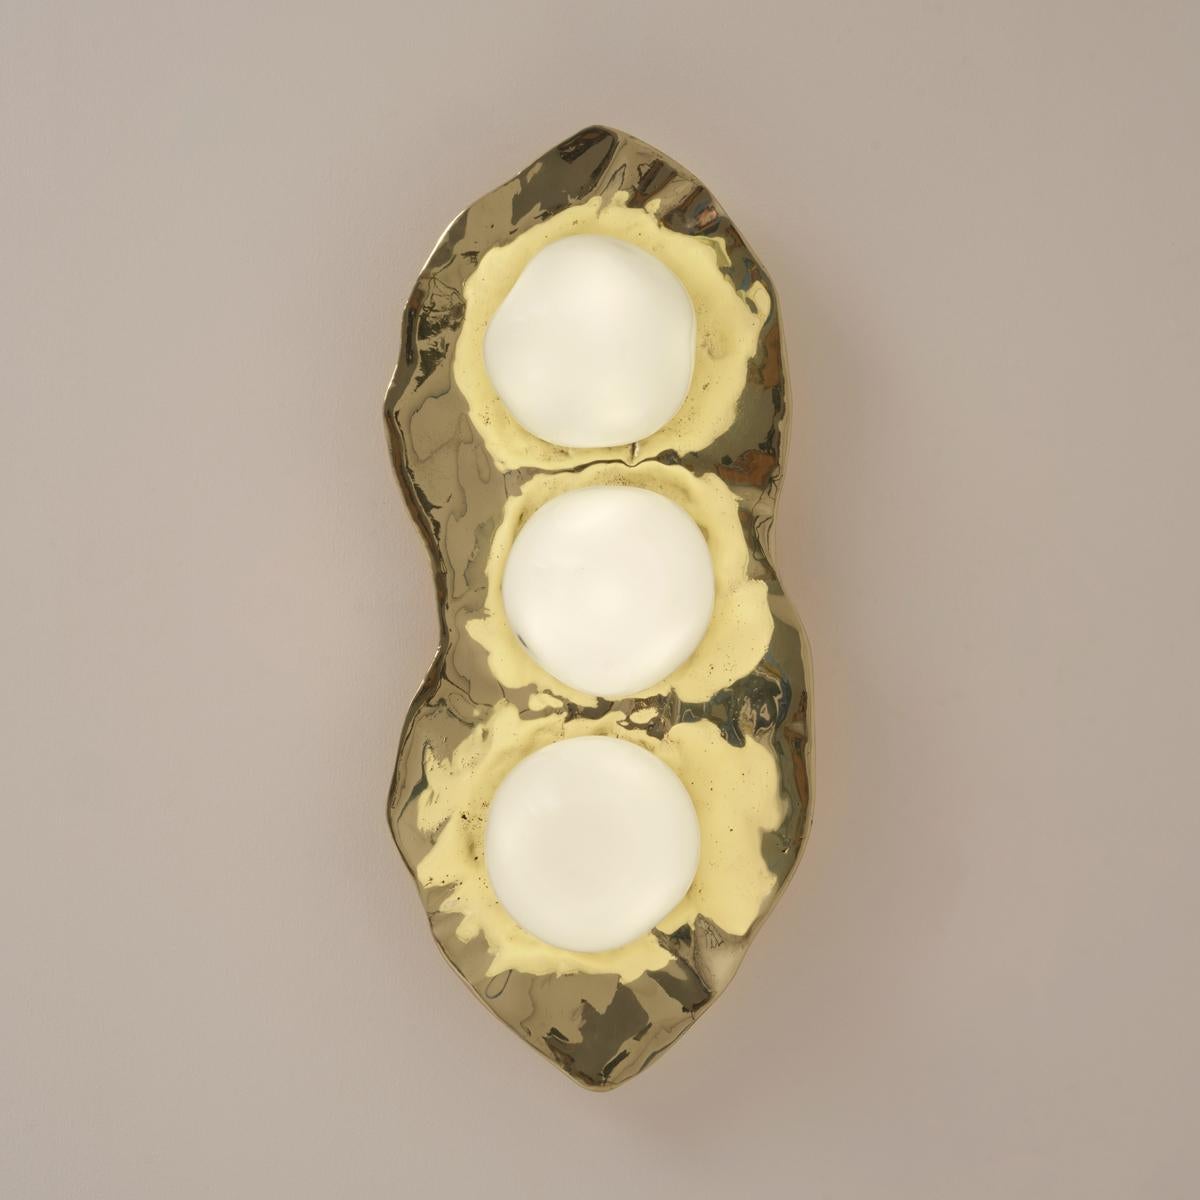 Shell Wall Light by Gaspare Asaro-Polished Brass Finish In New Condition For Sale In New York, NY